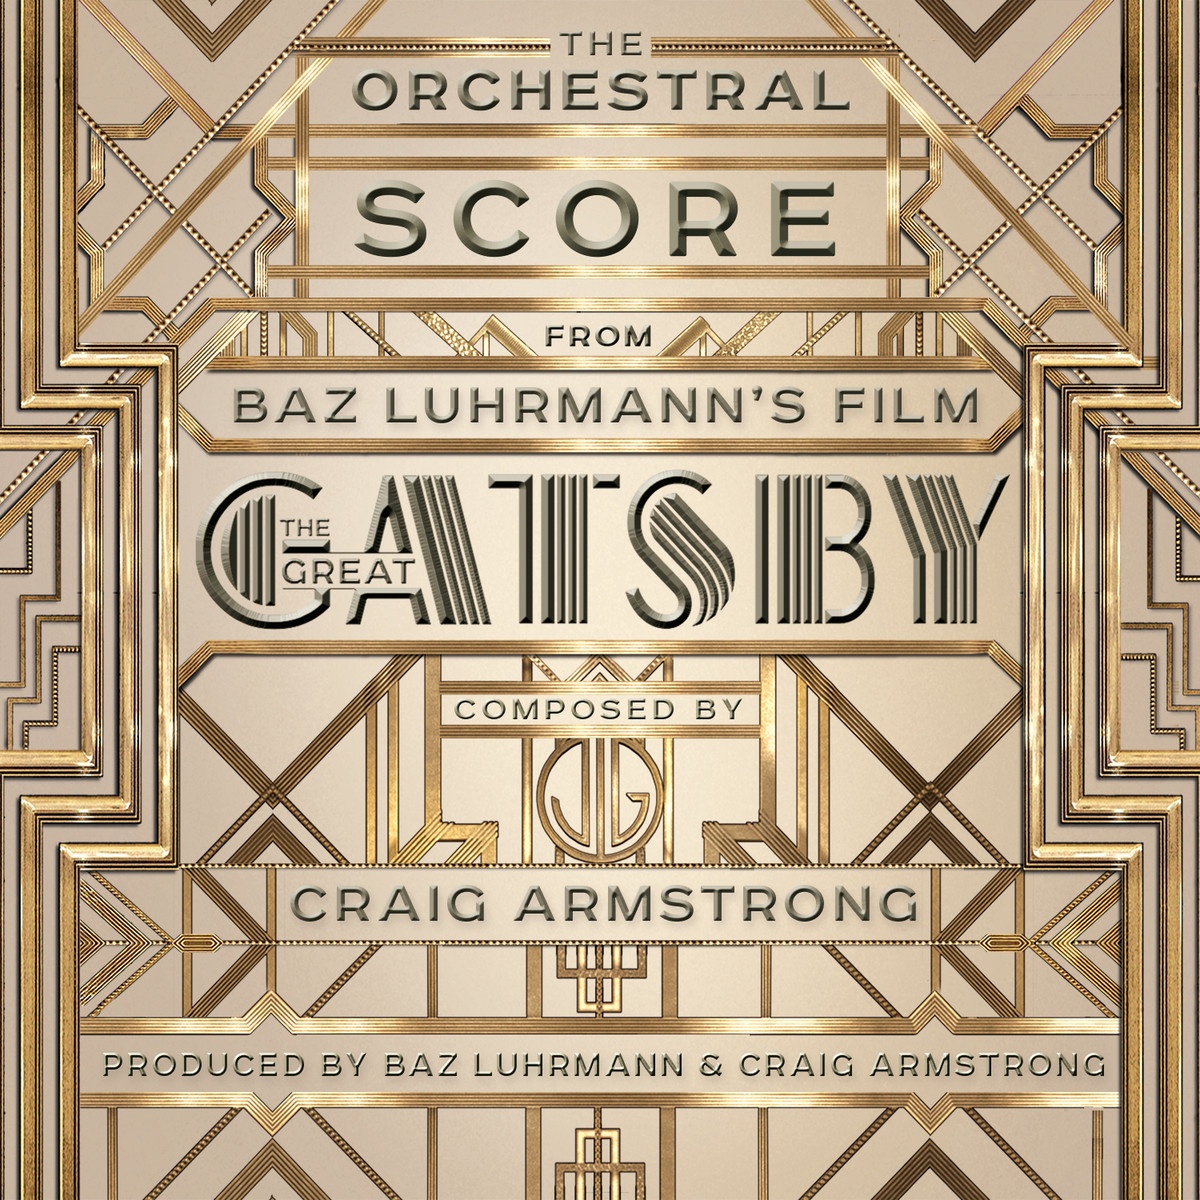 The Orchestral Score from Baz Luhrmann's Film The Great Gatsby